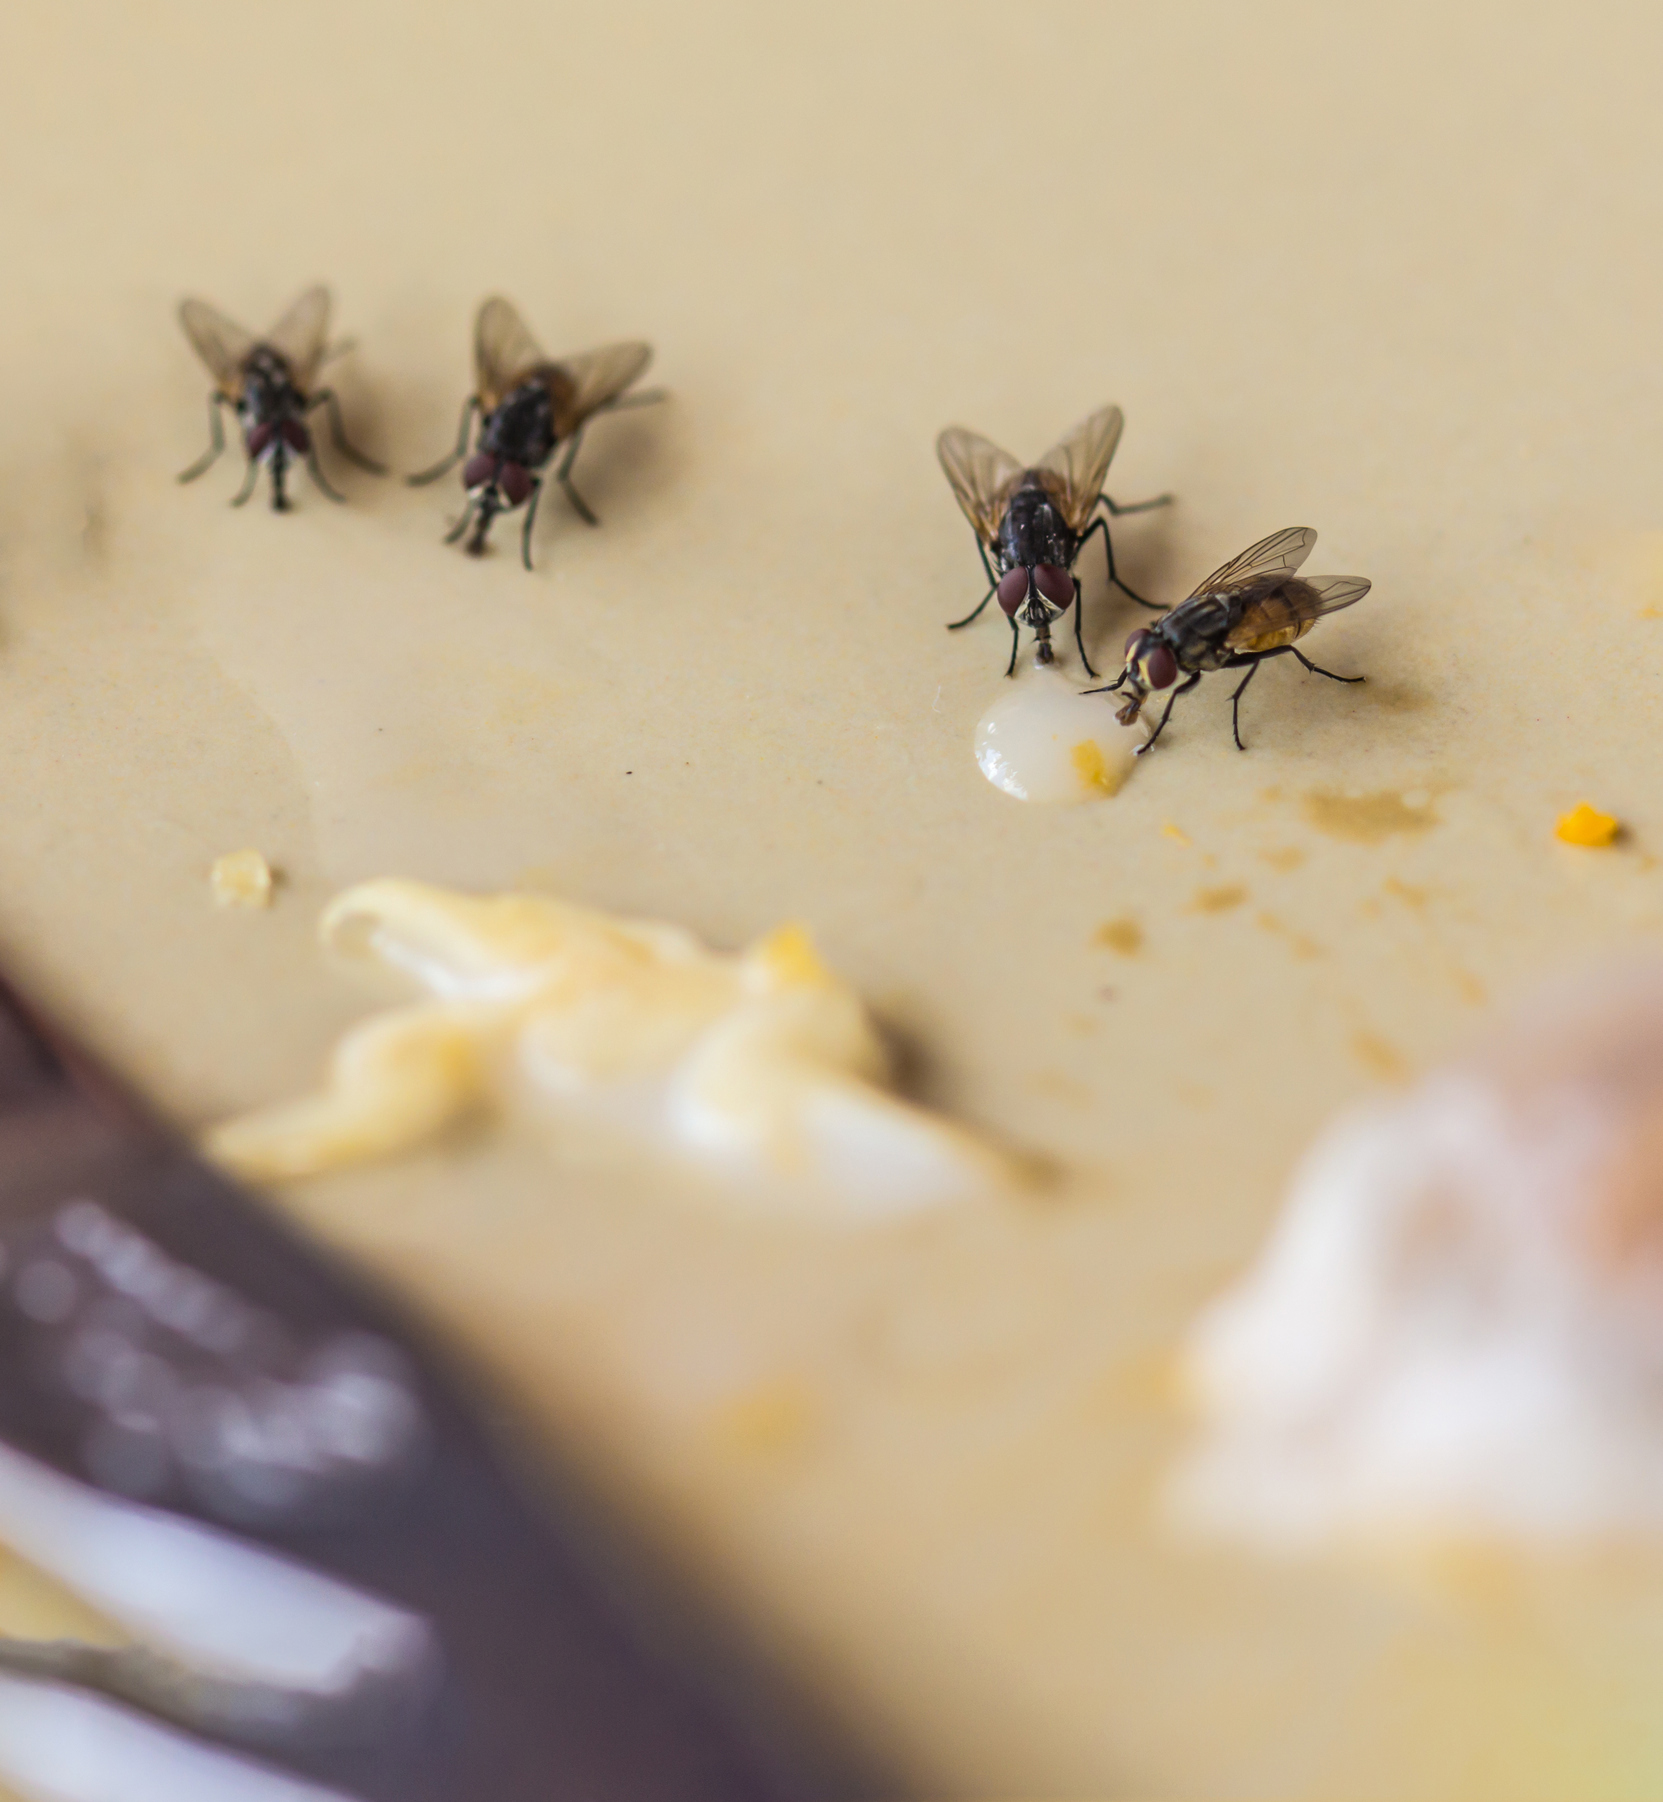 Get Rid of House Flies: House Fly Control Information